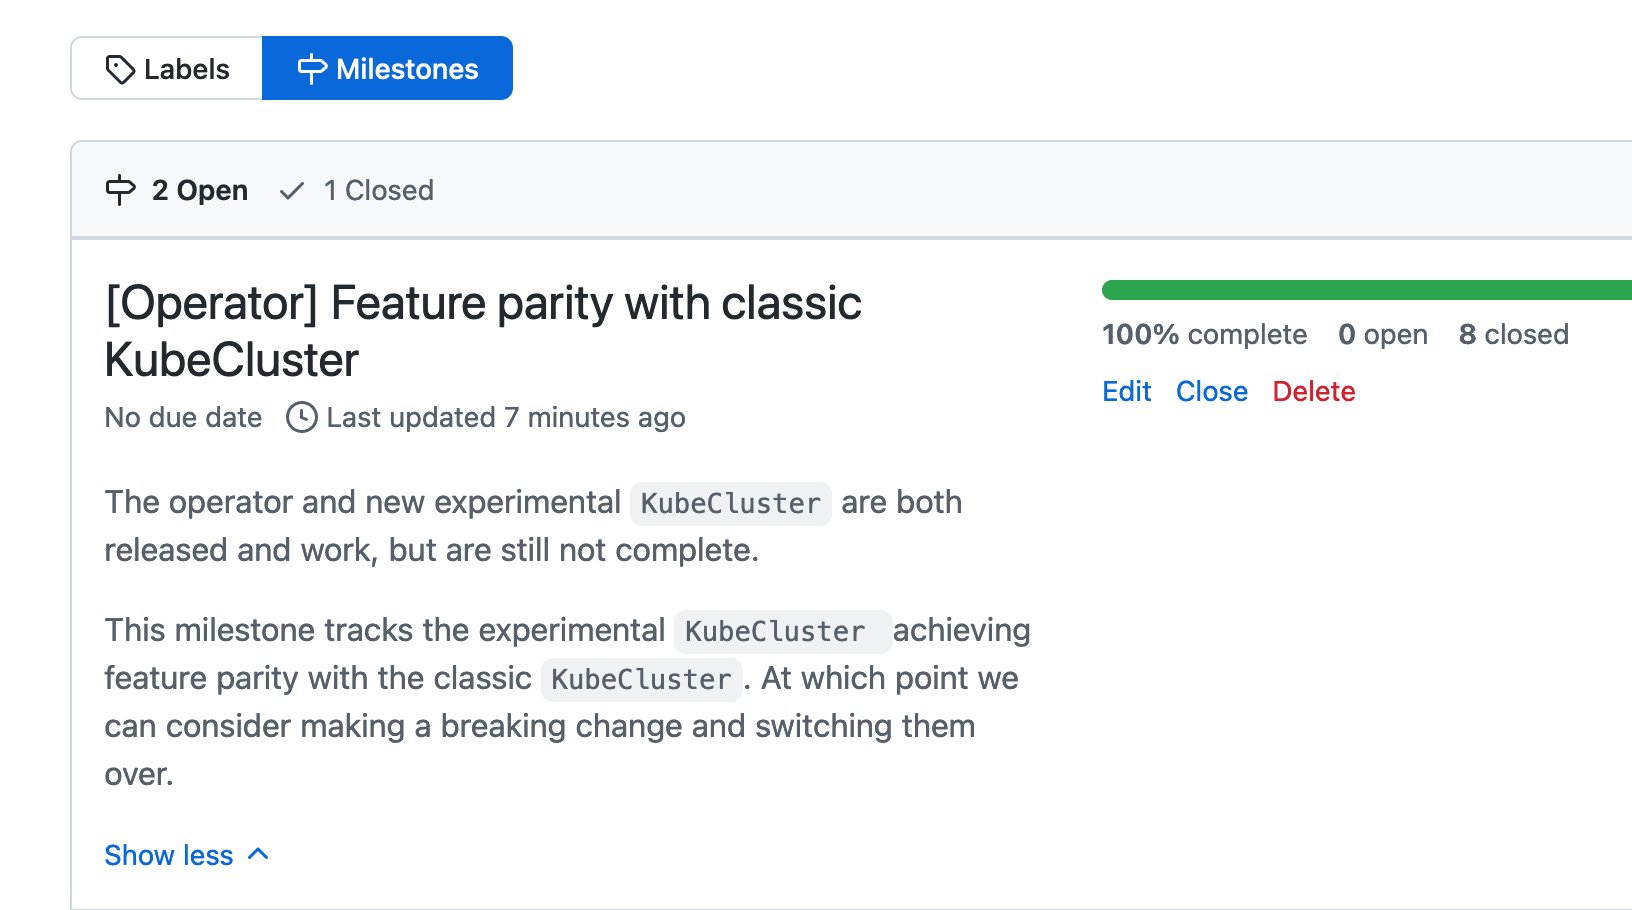 Screenshot of the KubeCluster feature parity milestone with 100% of tasks completed